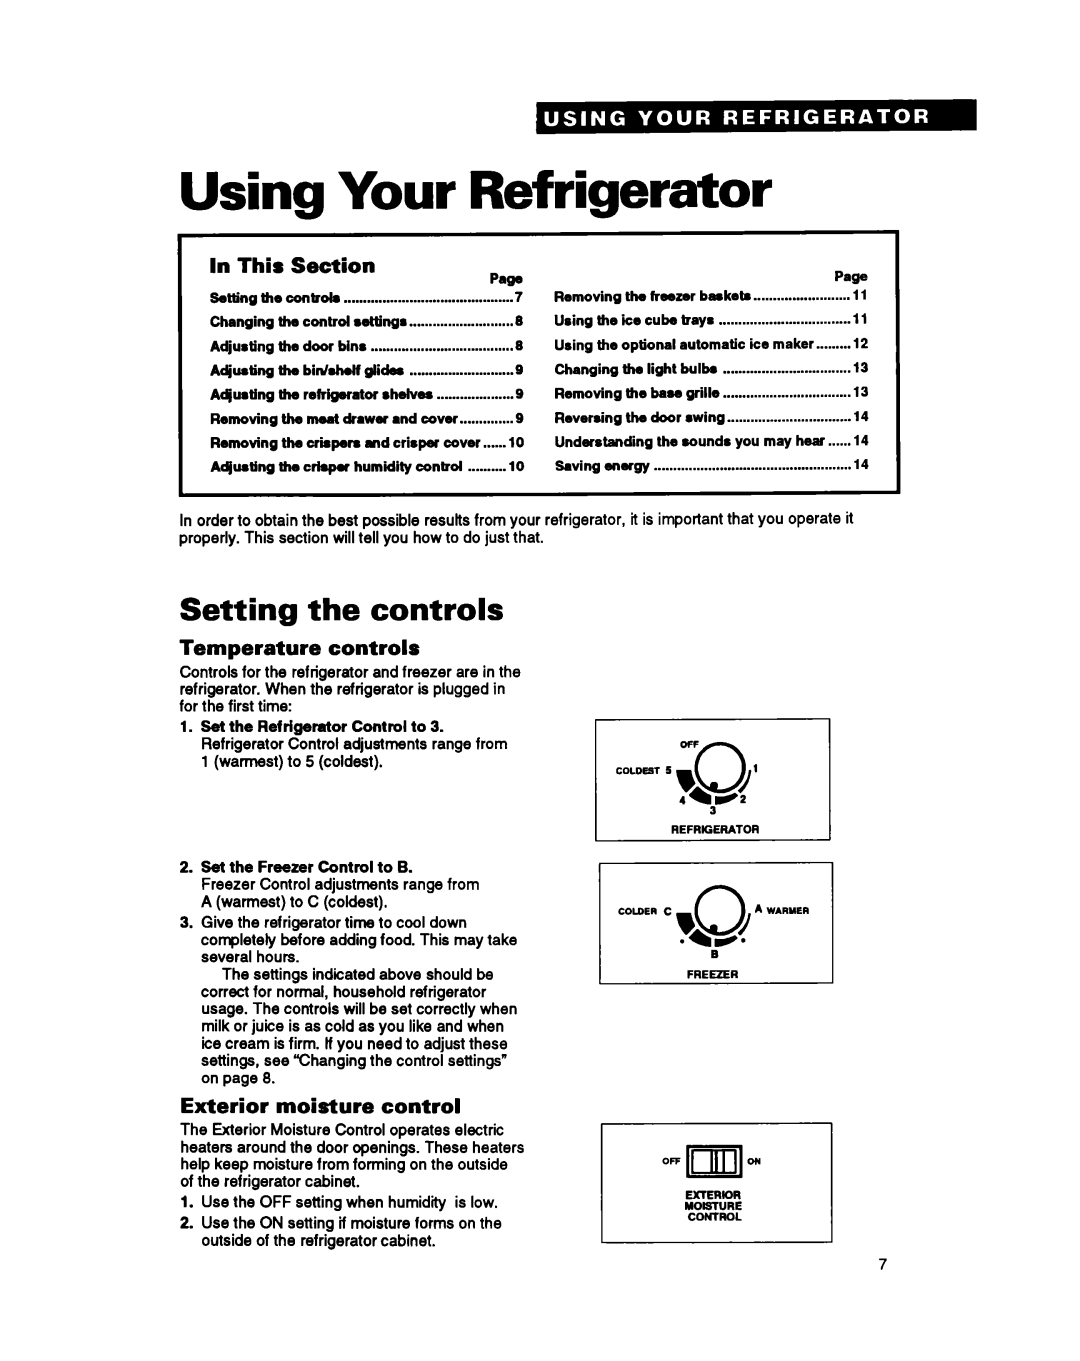 Whirlpool EB21DK warranty Using Your Refrigerator, Setting the controls, In This, Page, Temperature controls, Section 